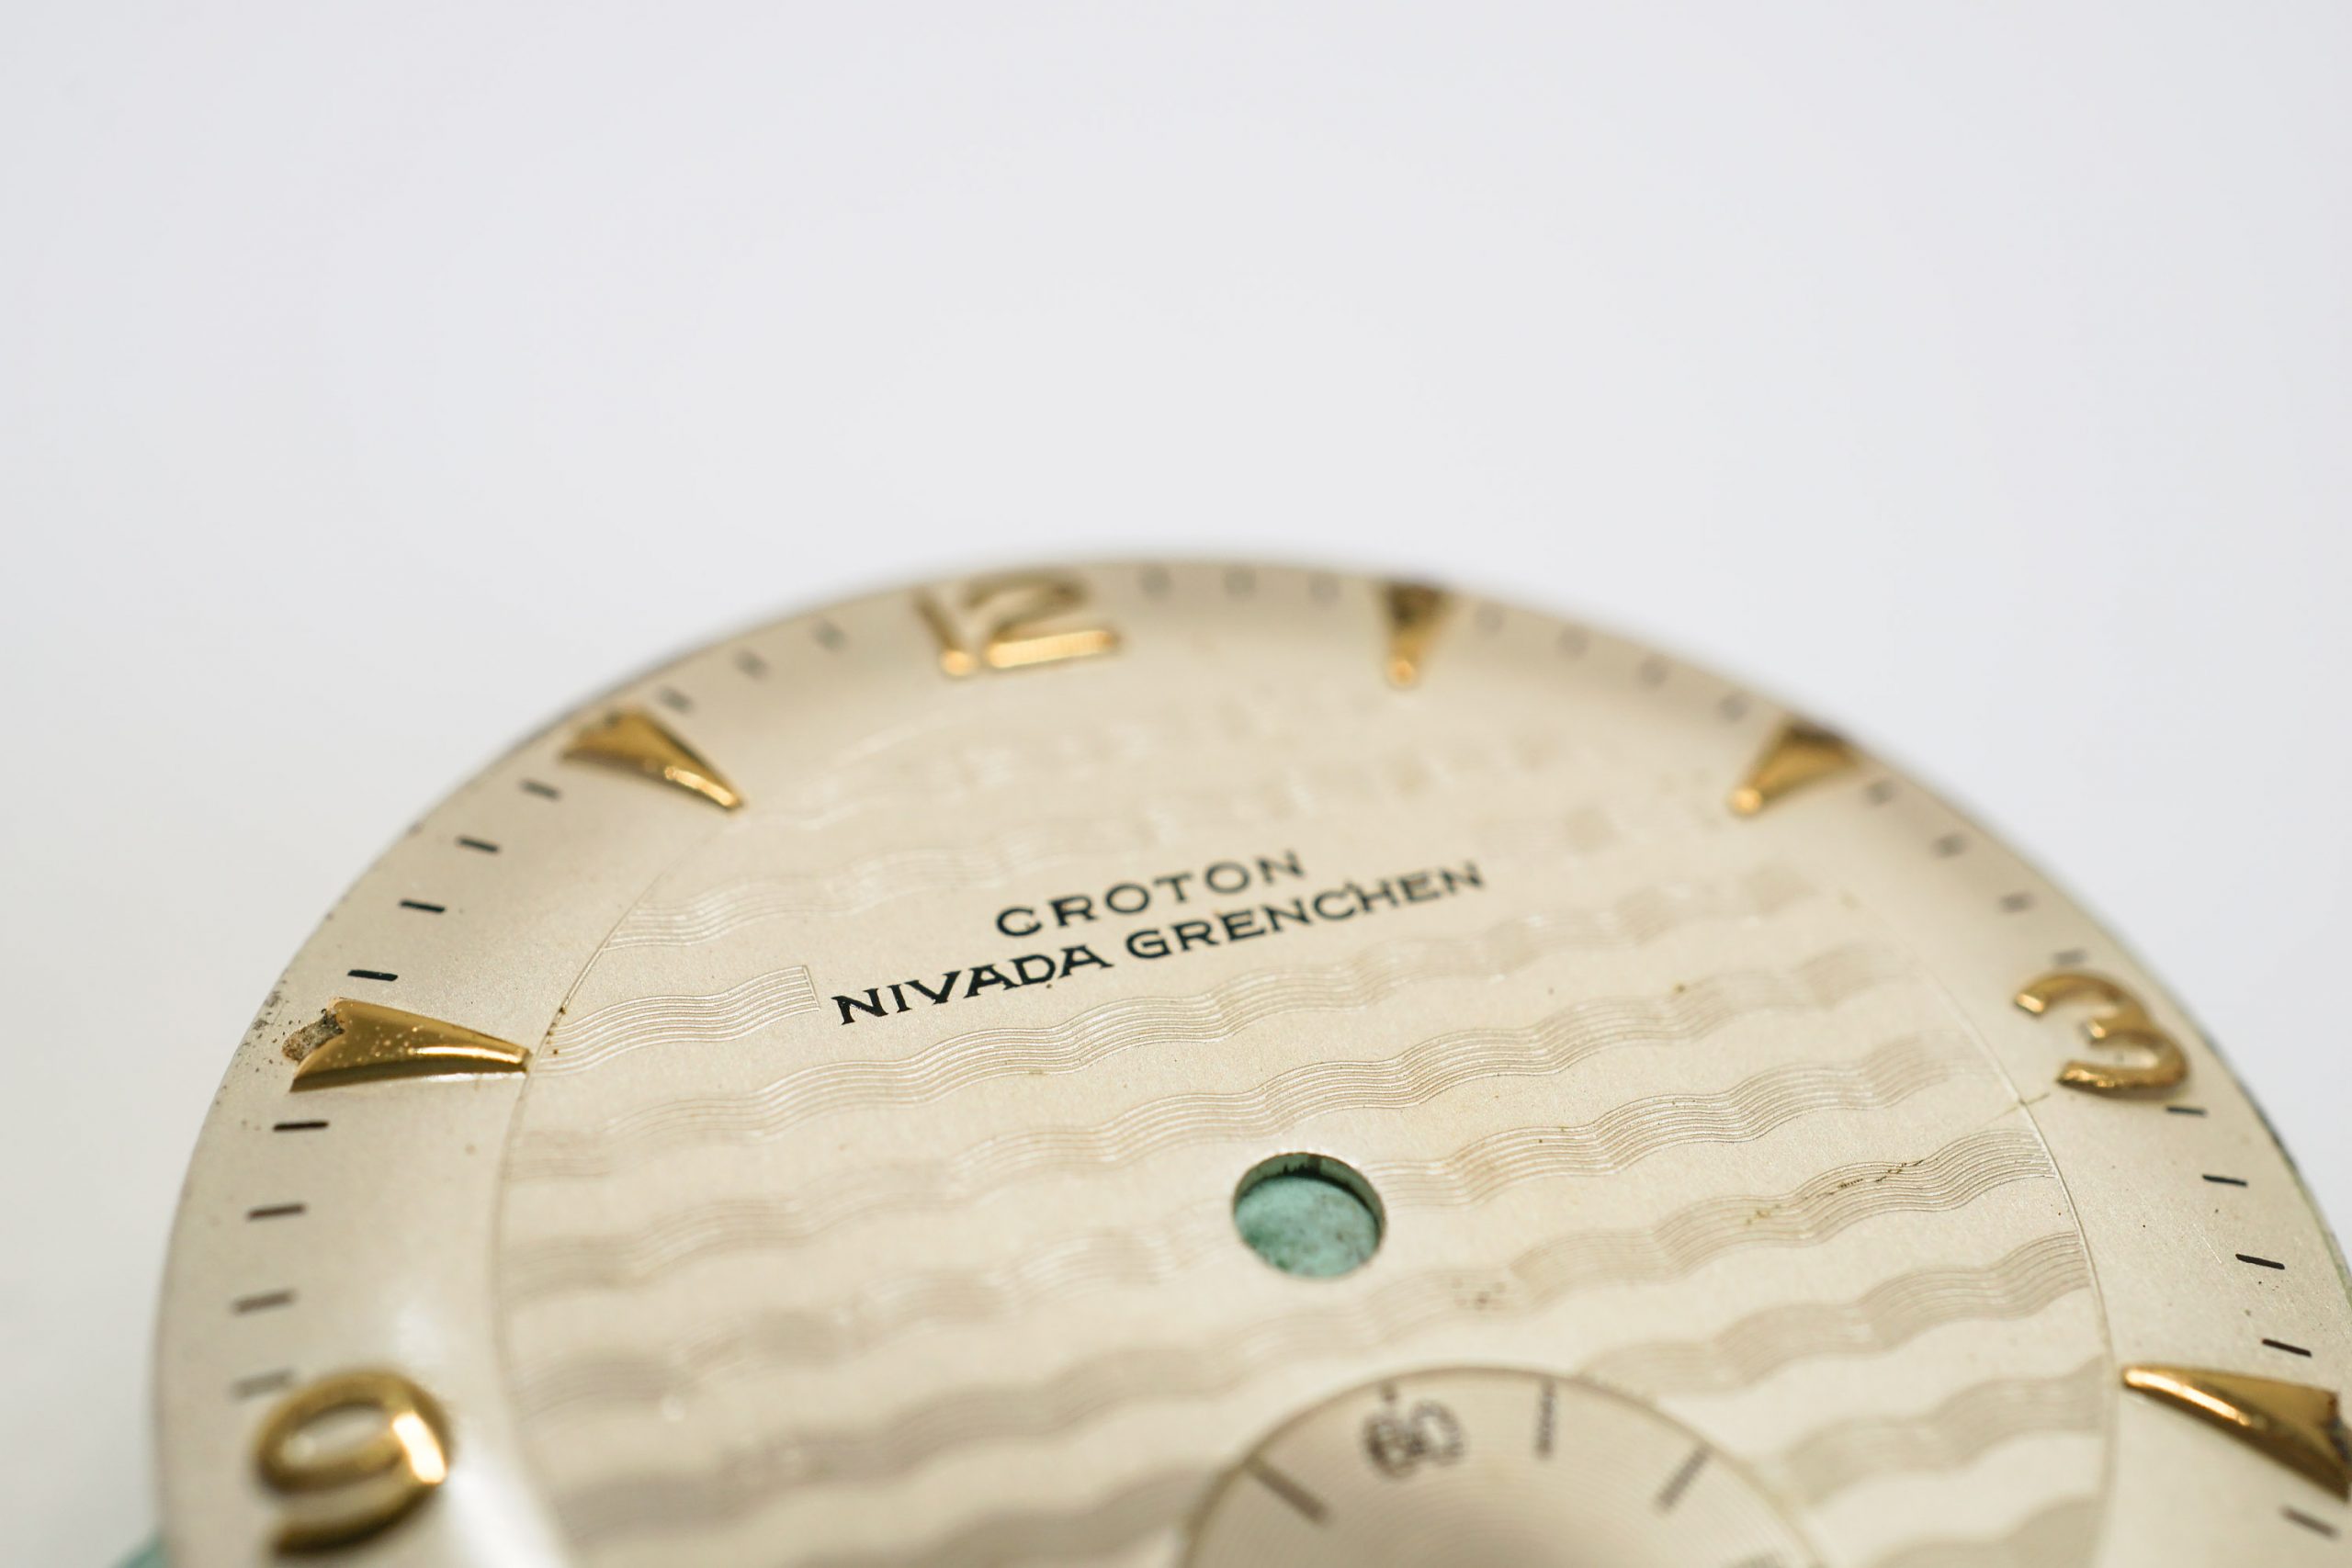 1960s Nivada Grenchen dial